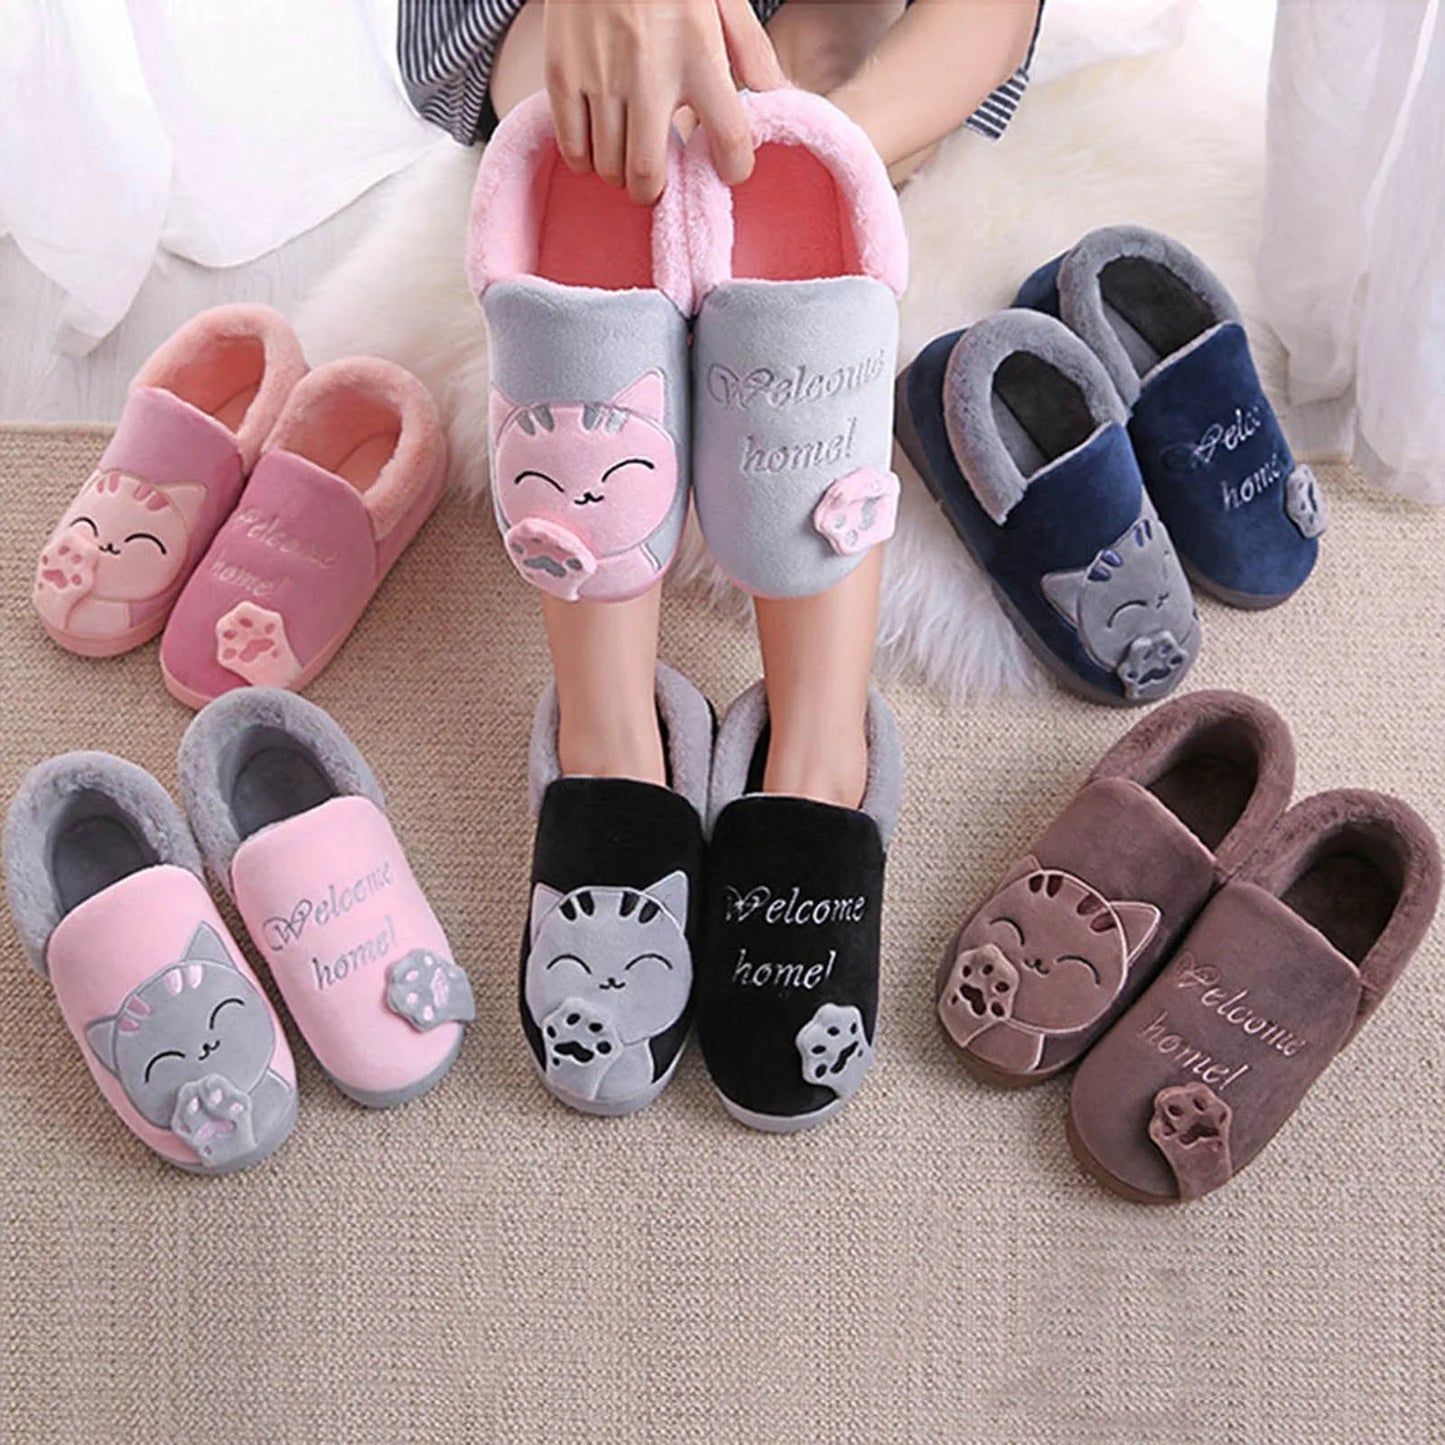 Men Shoes Cotton Slippers Fashion Cartoon Cat/Home Indoor Couple Winter Warm Shoes